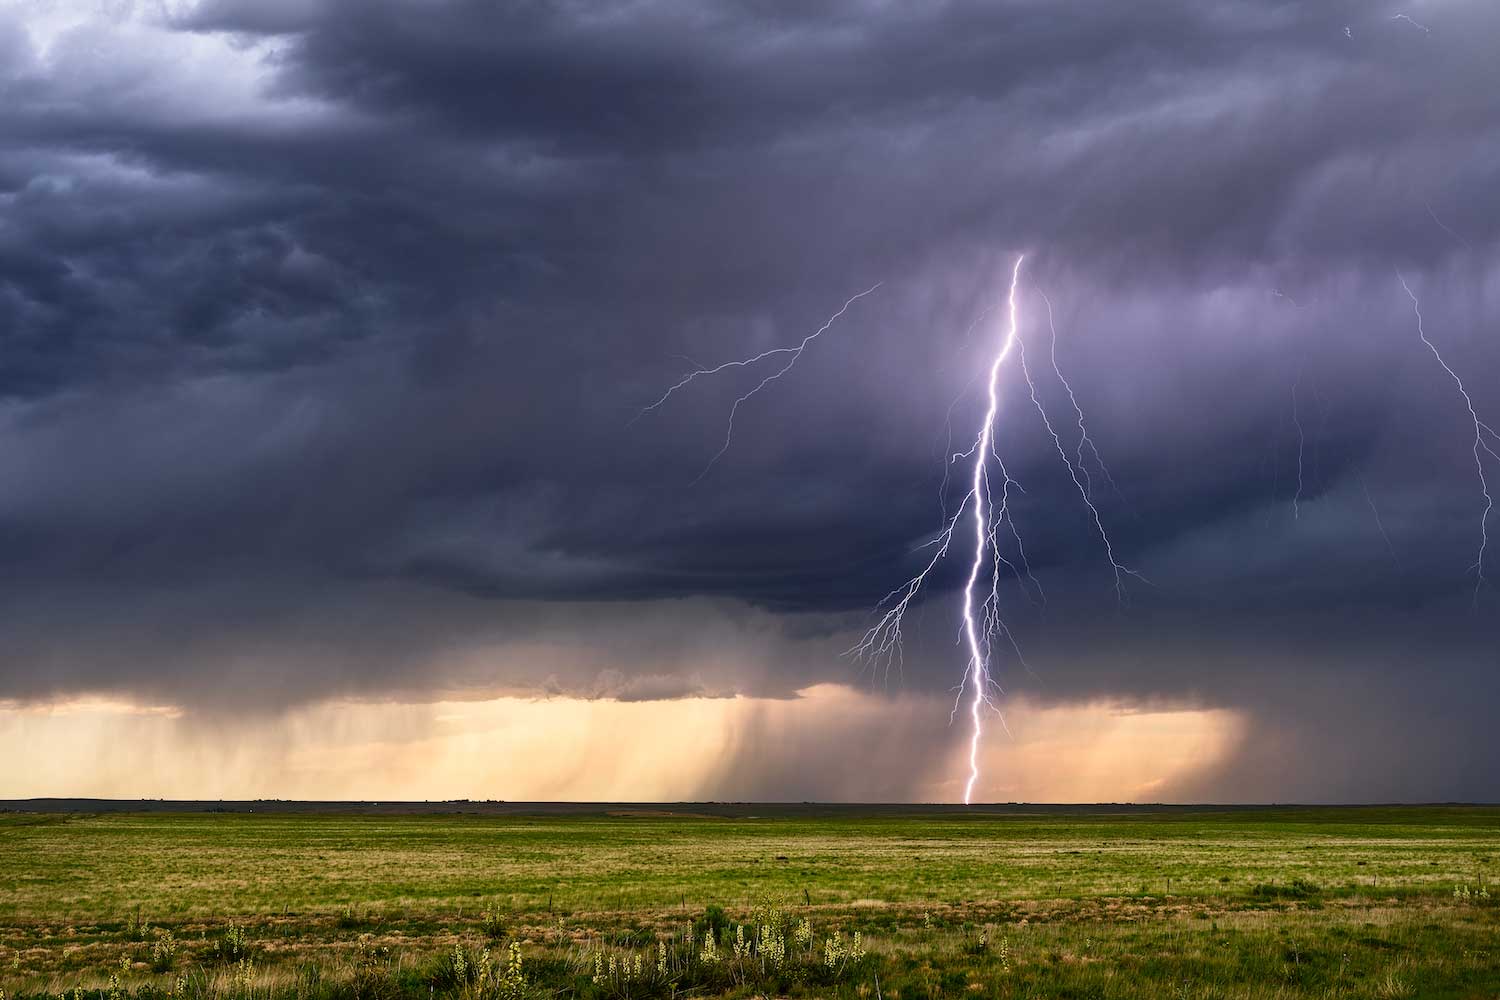 A bolt of lightning striking the ground in the distance.